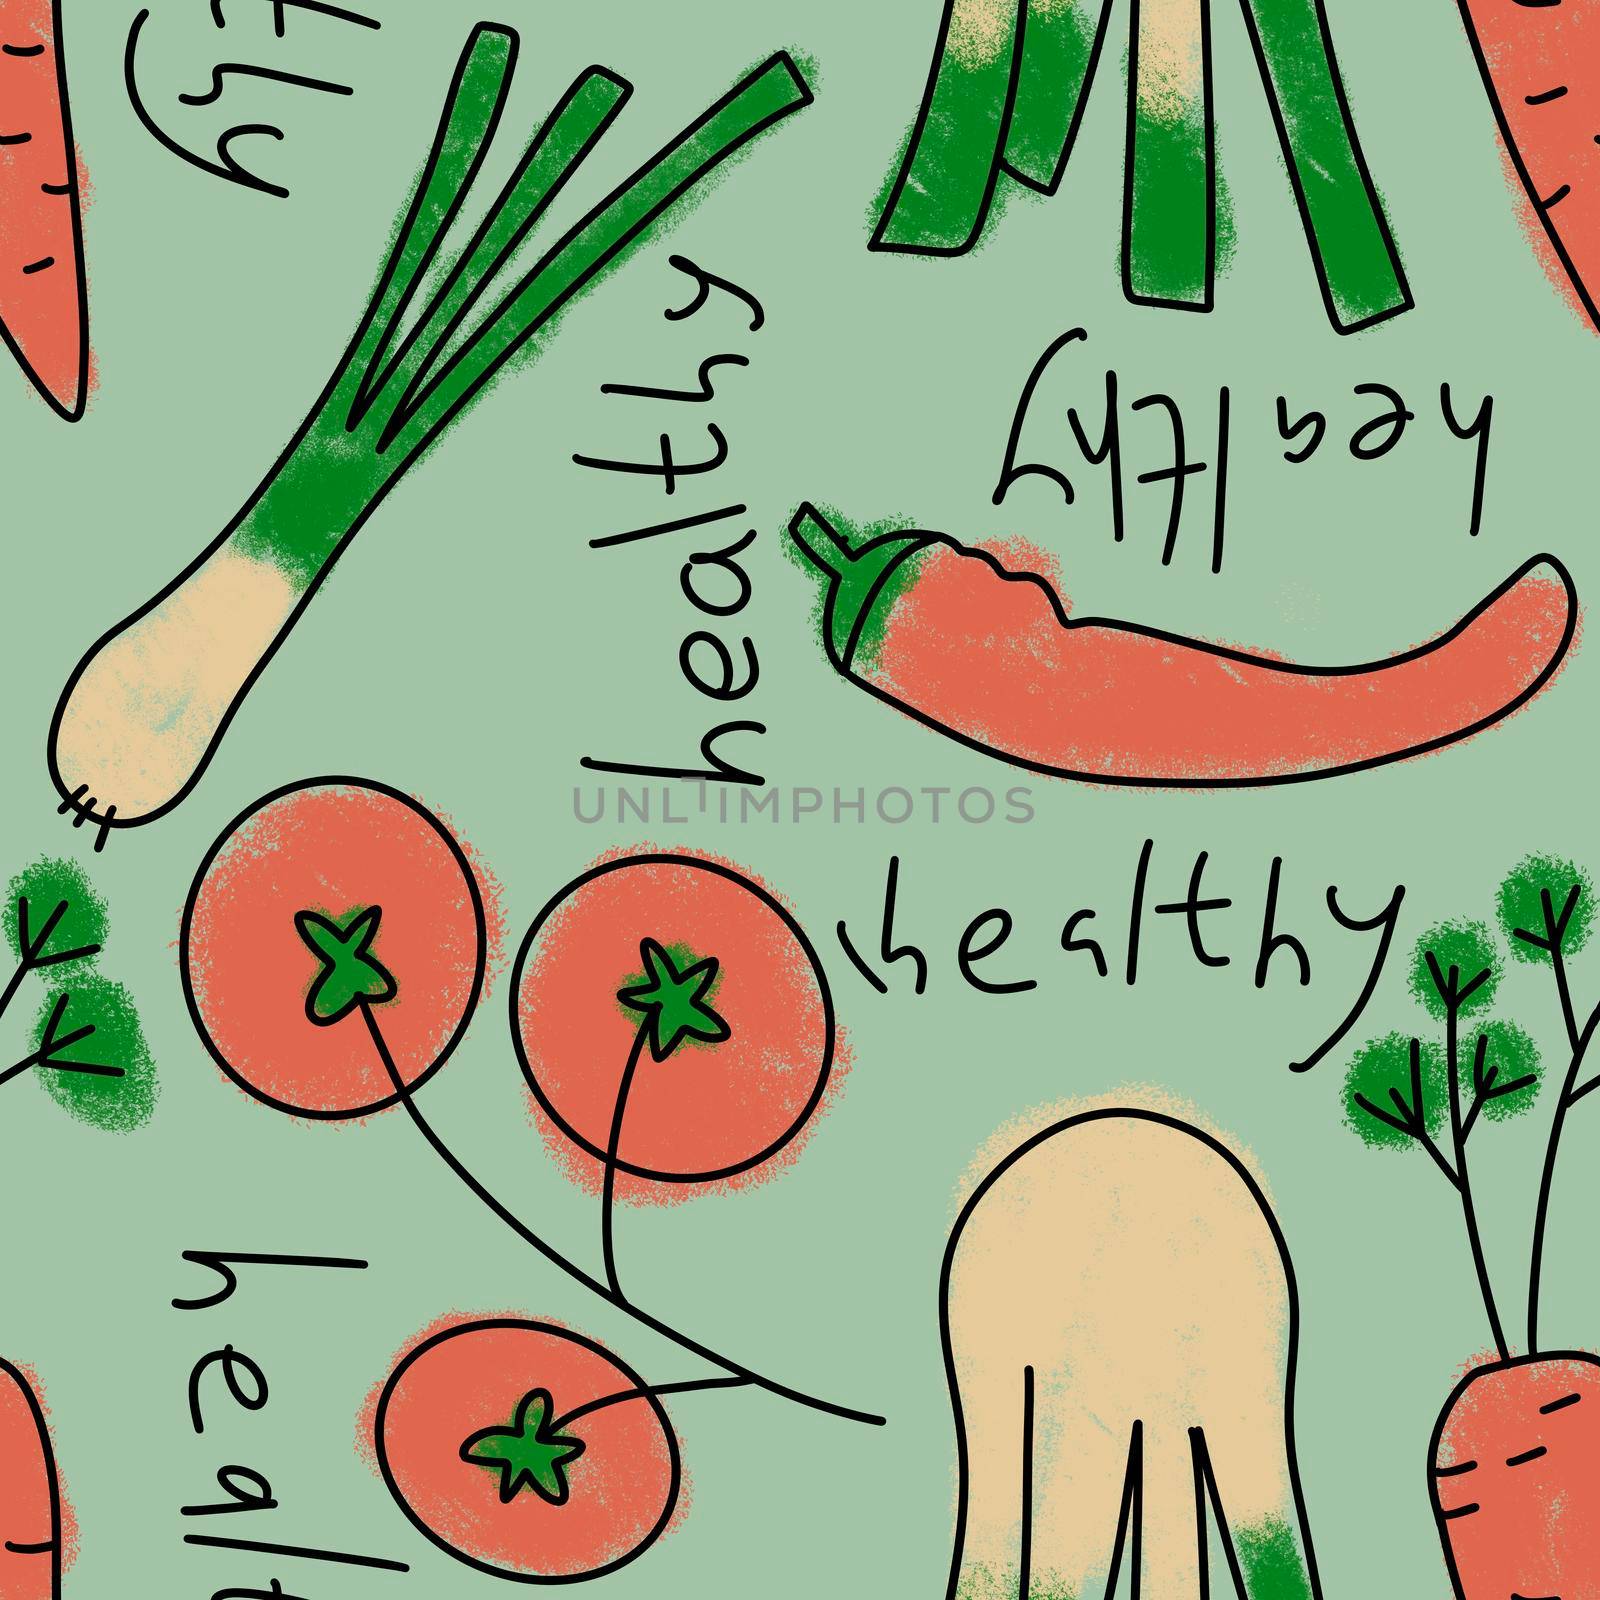 Hand drawn seamless pattern with vegetables veggies vegan vegetarian design. Tomato potato carrot cabbage leek onion bell papper fabric print. Retro vintage kitchen textile background, healthy food concept. by Lagmar